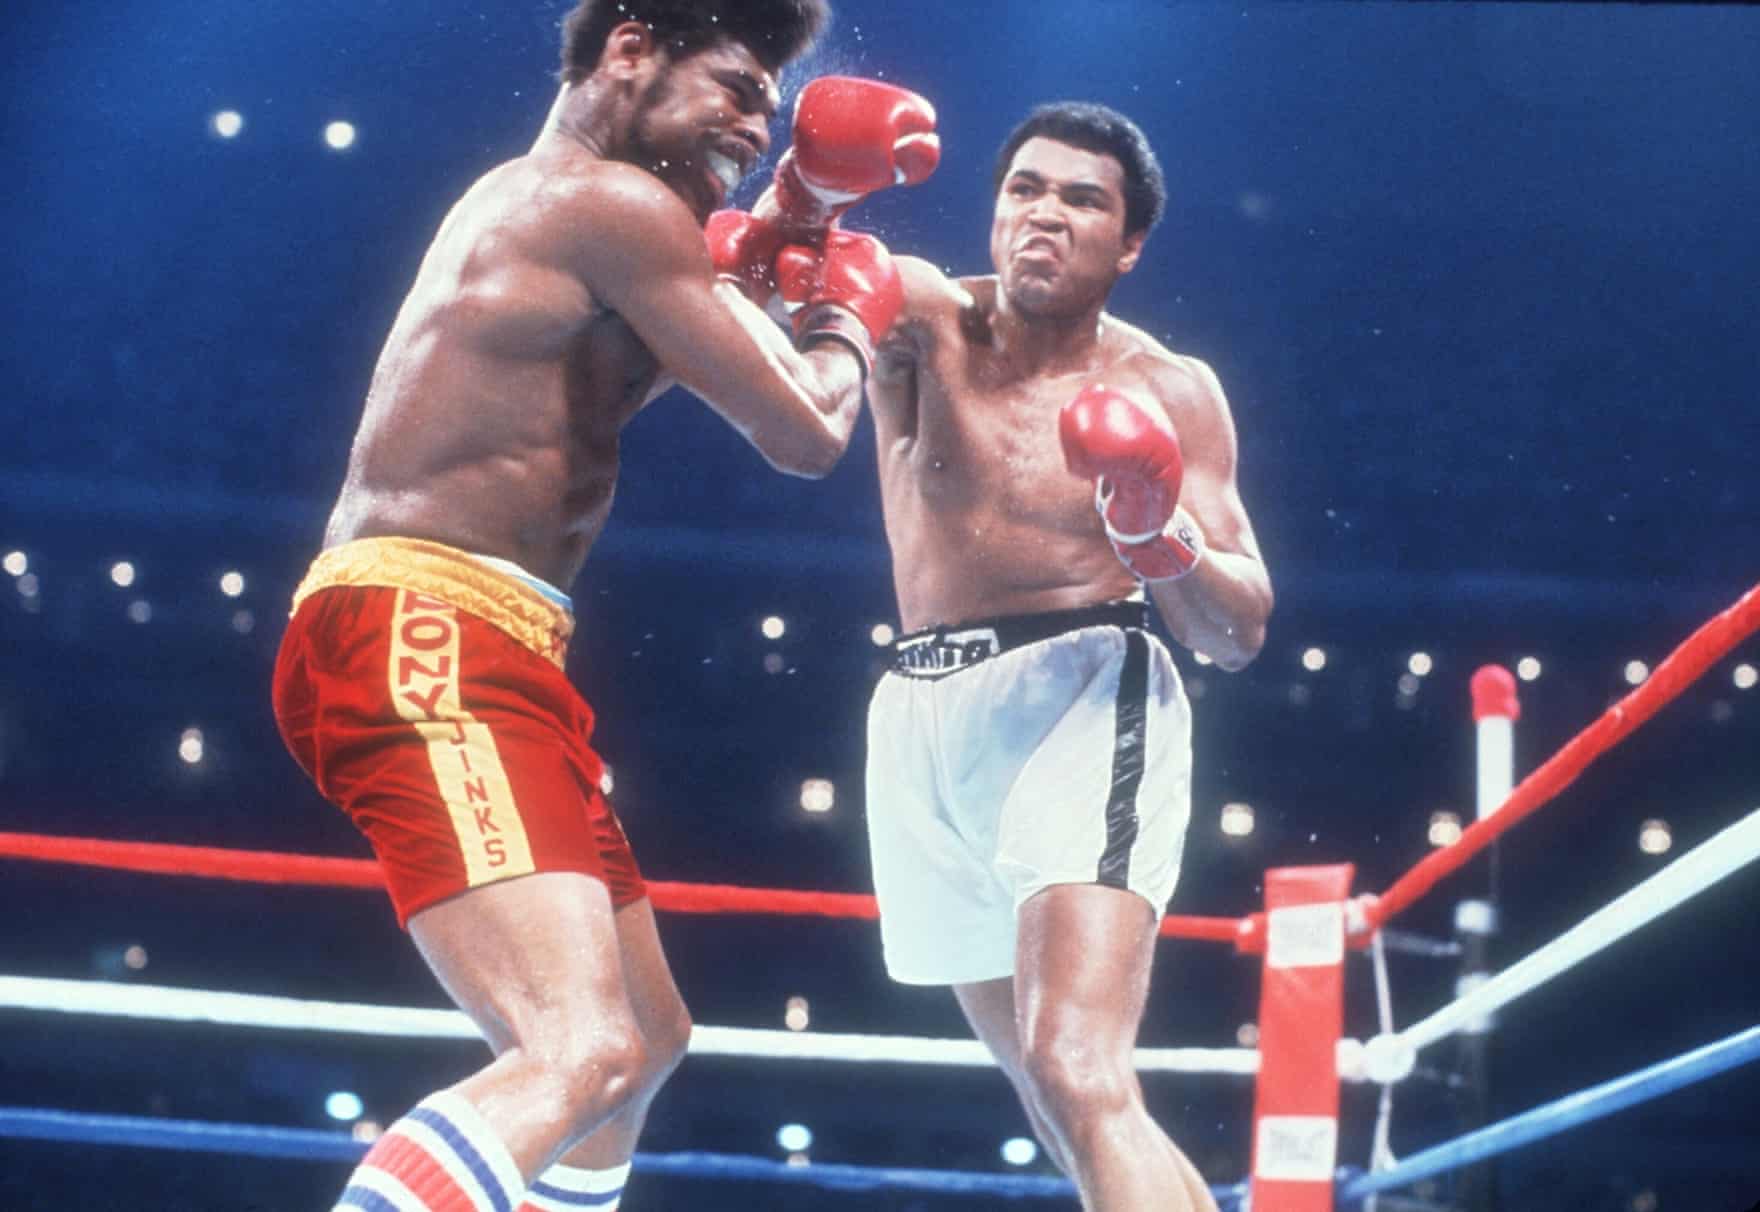 This is a brutal photo of Leon Spinks’s contorted face which certainly communicates the power of Ali’s punch. Ali’s expression is also compelling – he looks somewhat savage. Technically, the framing is awkward. I would prefer it if Spink’s face wasn’t so close to the edge of the frame, but it’s hard to grumble with such a visceral shot.